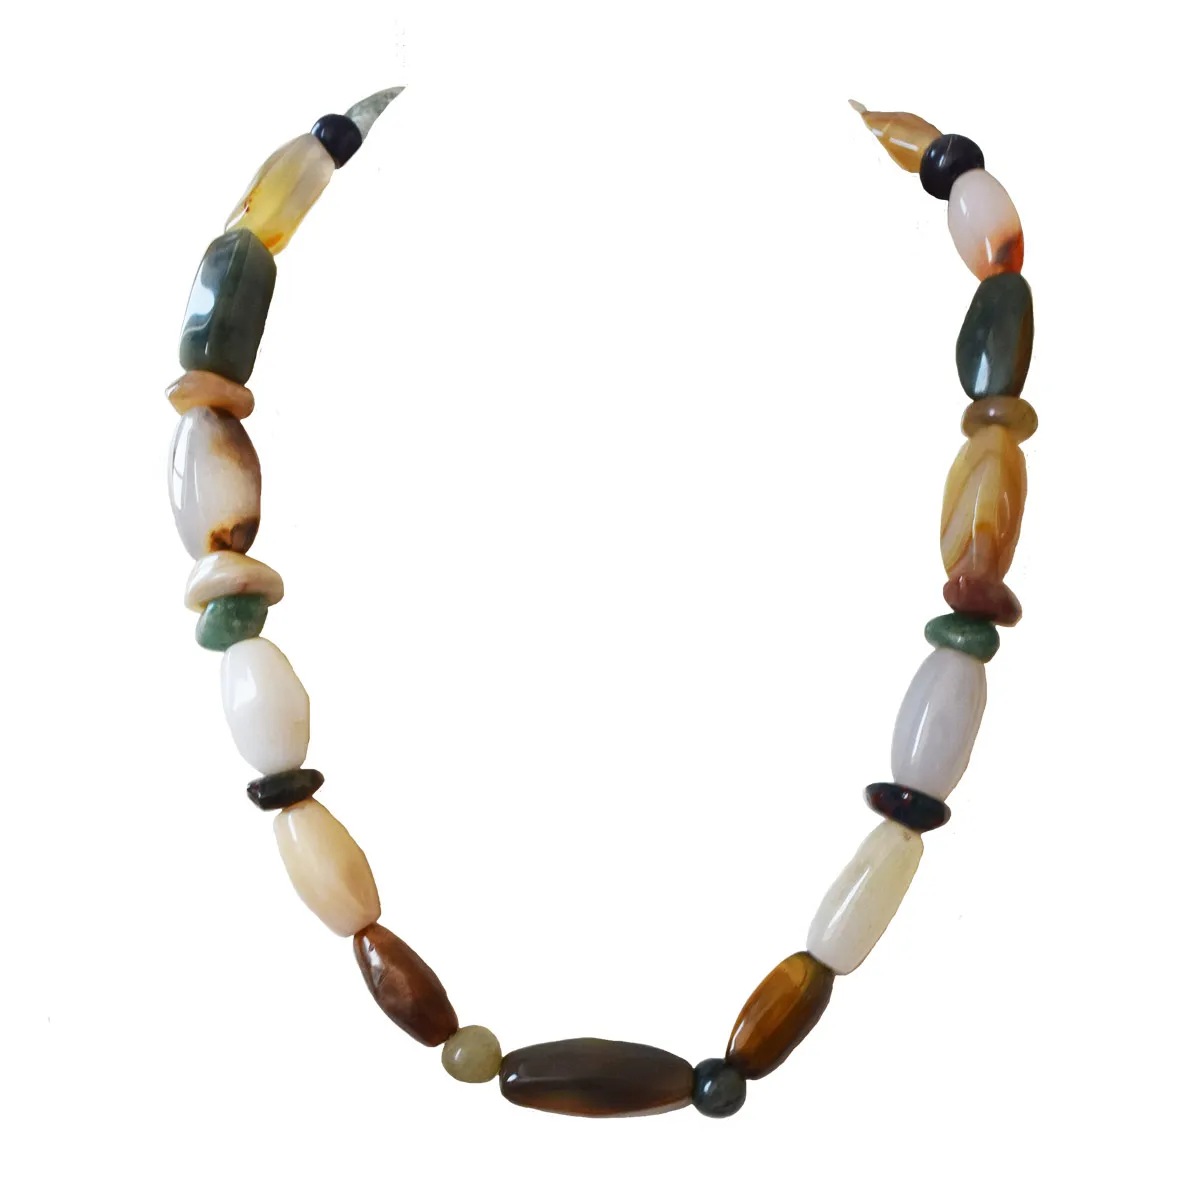 Radiate with Beauty: The Multicolored Agate Stone Necklace (SN1064)